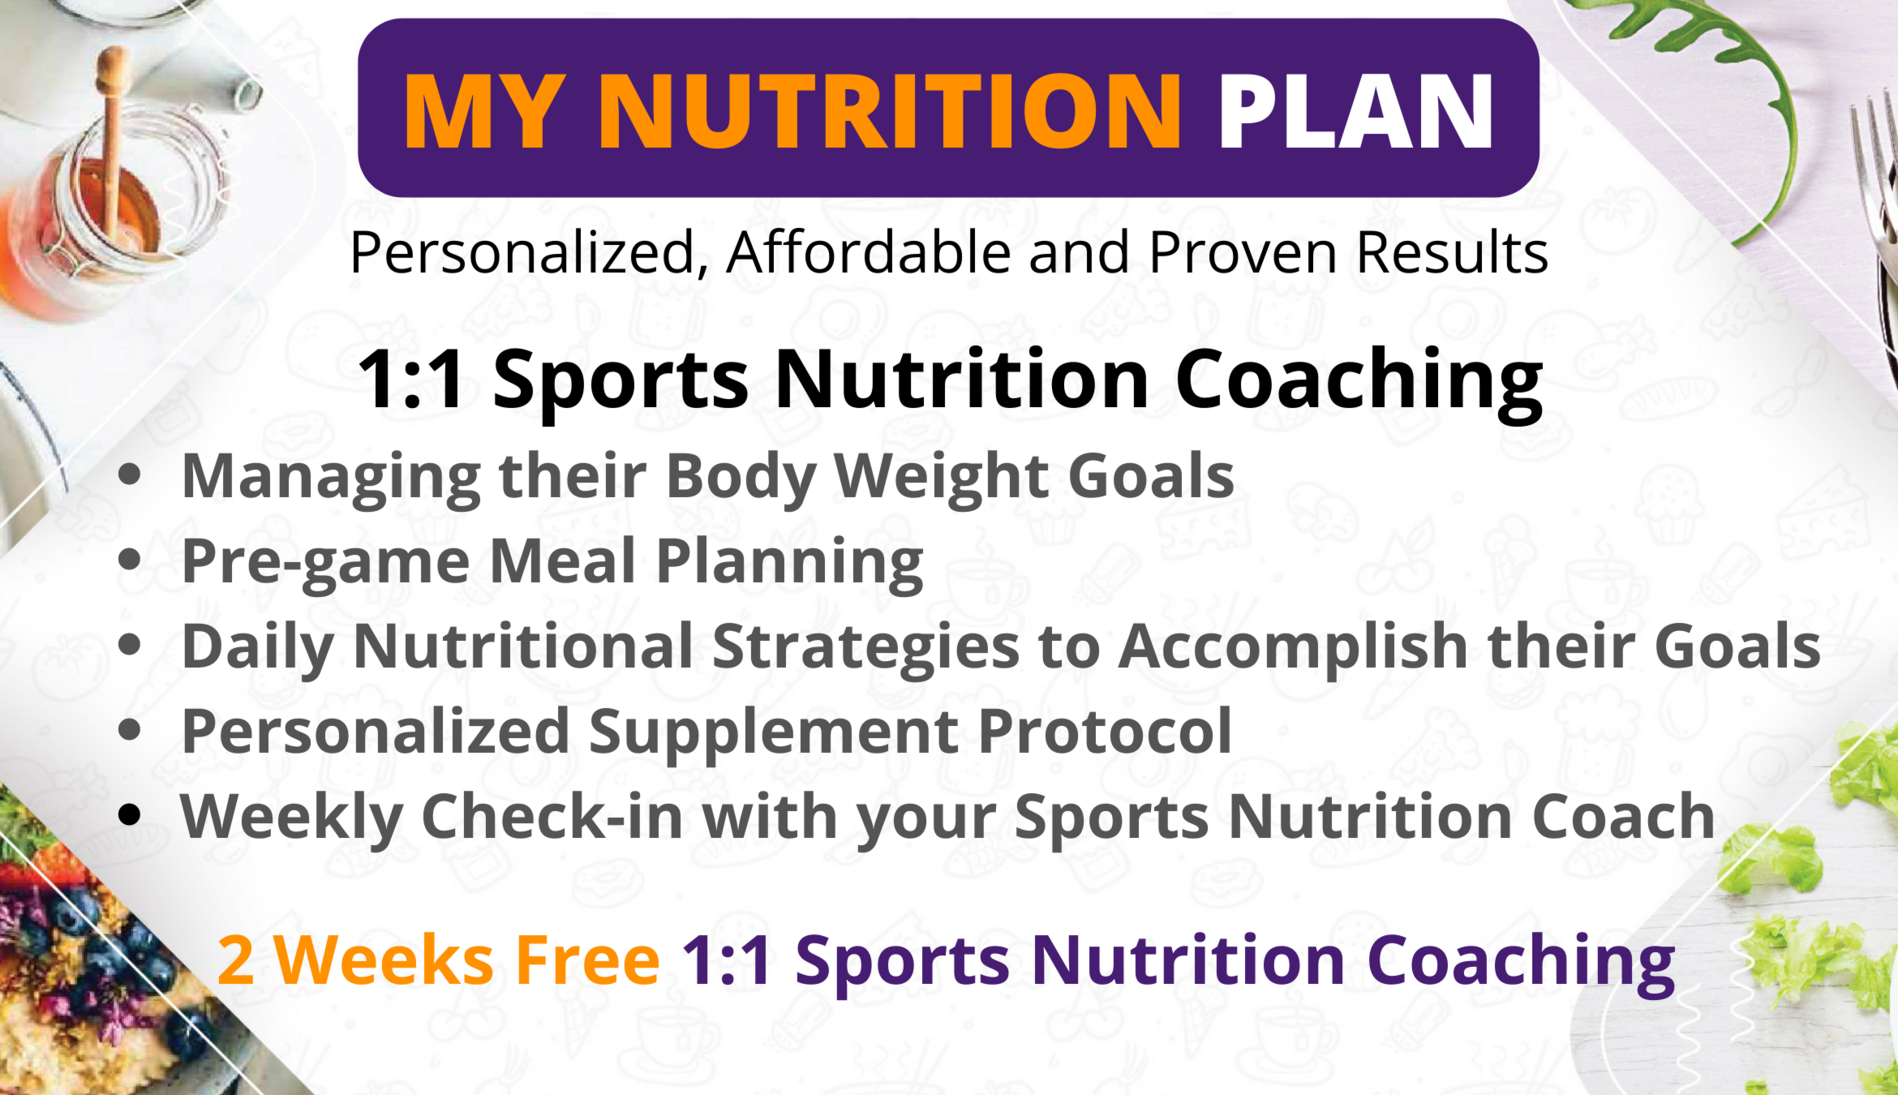 MY NUTRITION PLAN Features (780 × 400 px) (6)